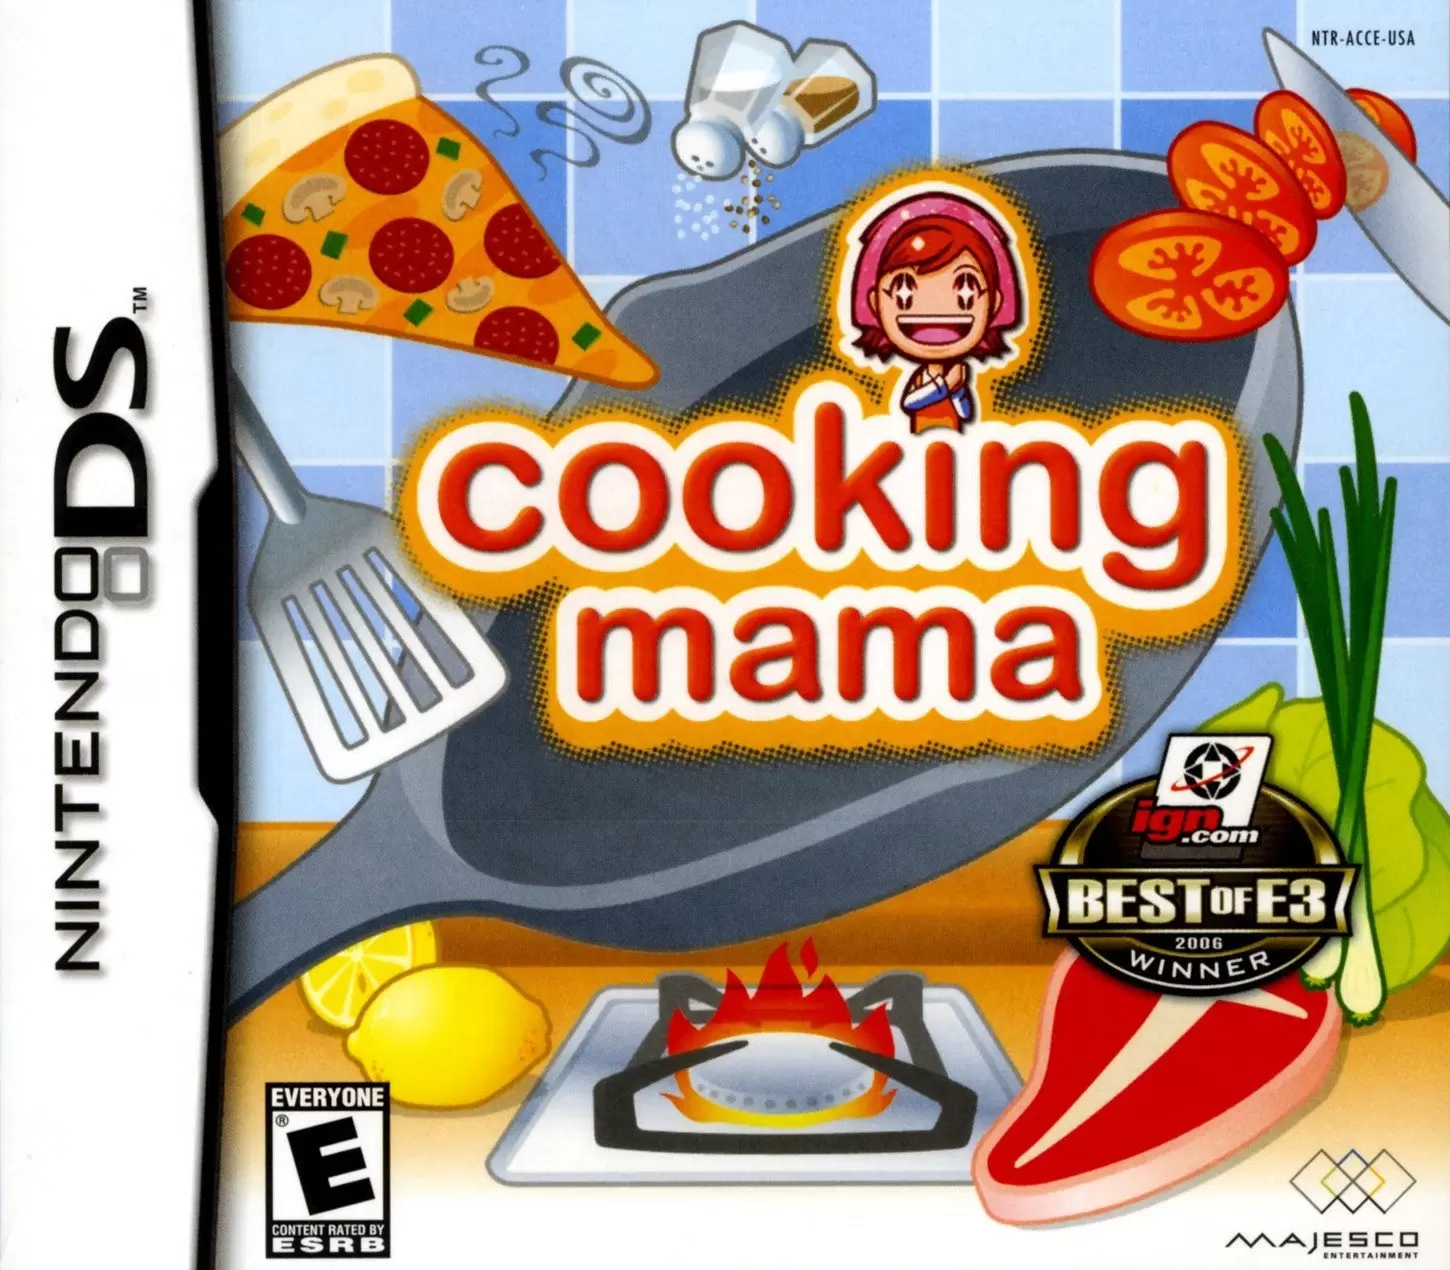 Nintendo DS Games - Cooking Mama